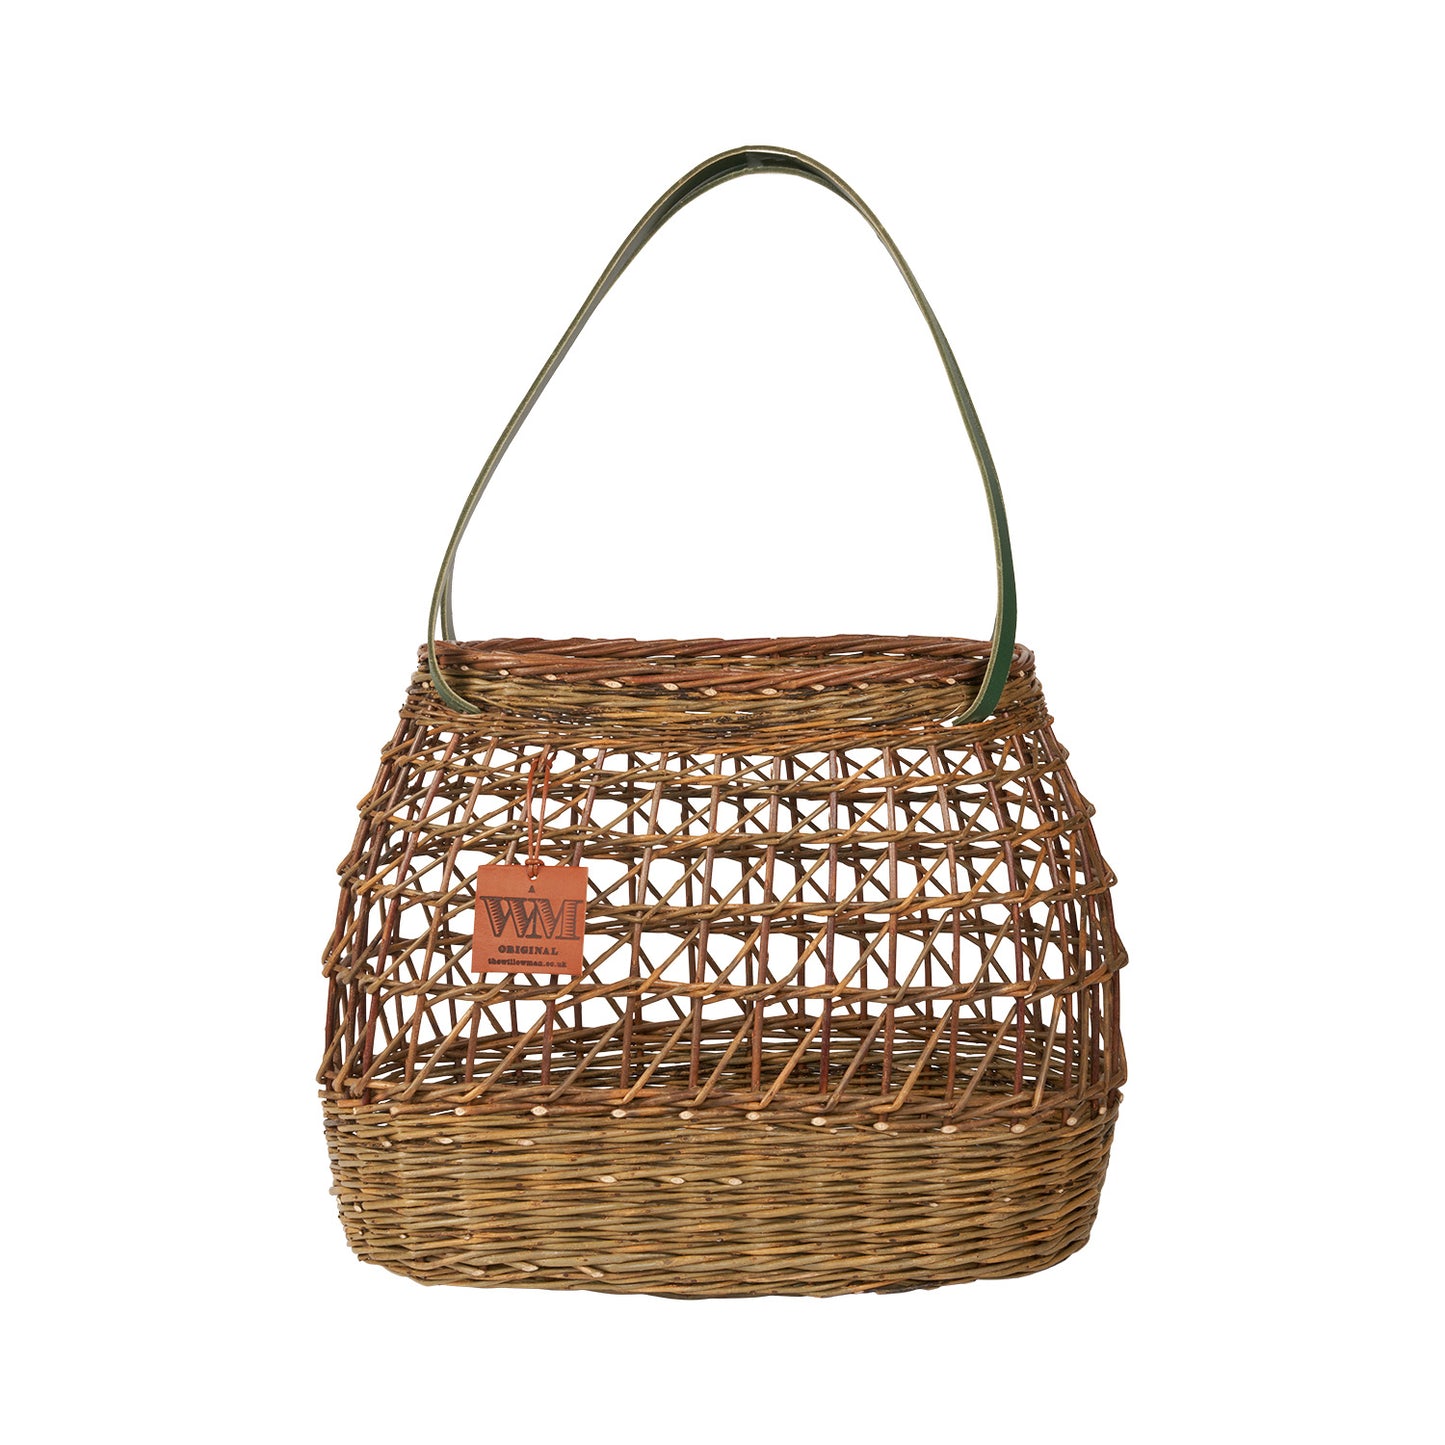 Willow Basket with Olive Green Leather Straps